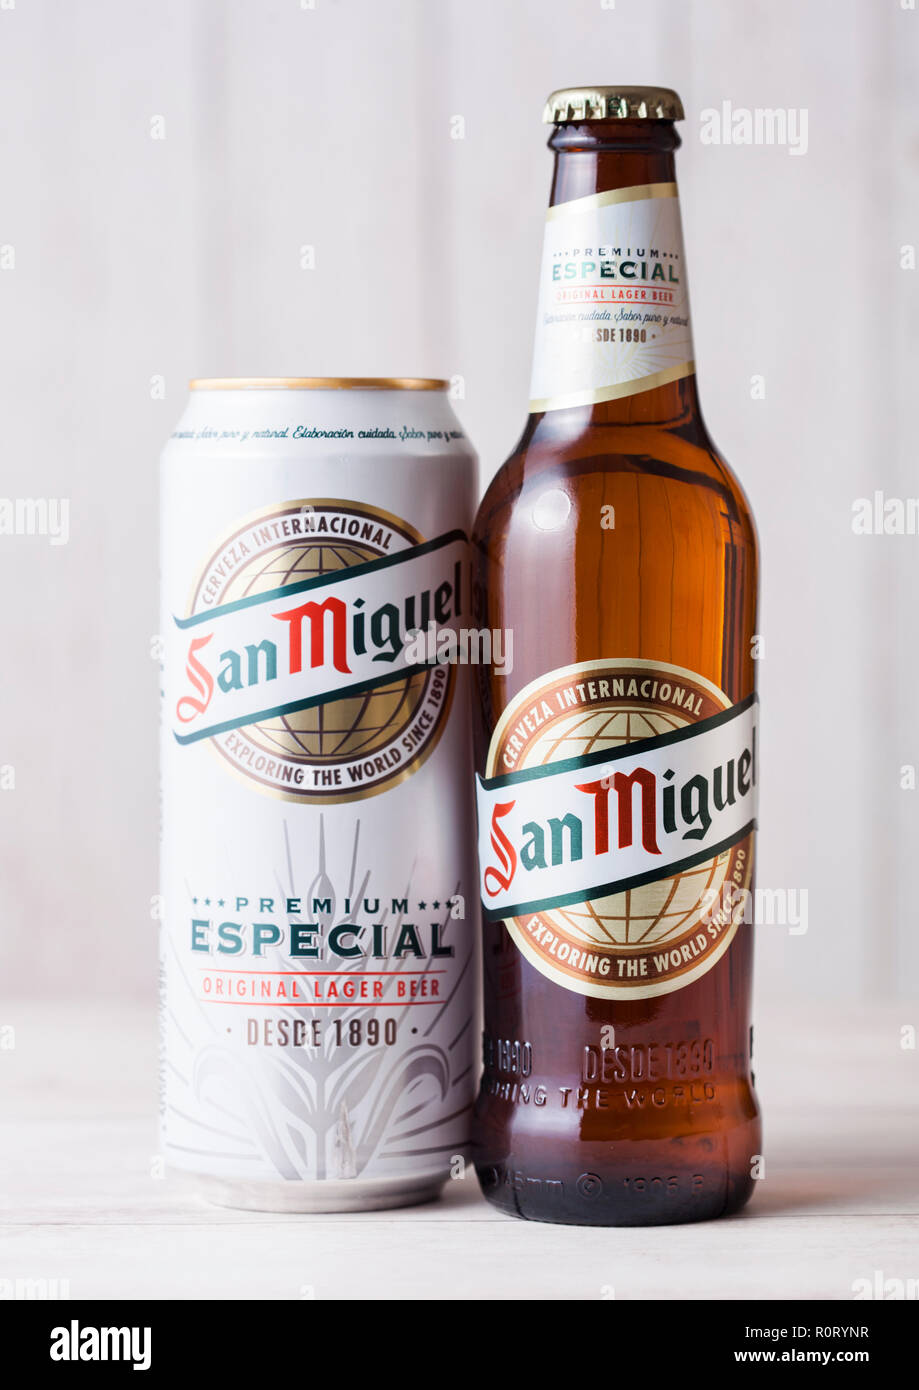 Sonderangebotsartikel LONDON, UK - APRIL 27, Alamy background. is Miguel on San brand The San 2018: and of of can brand Miguel - beer Bottle wooden Stock aluminium the beer Photo lager leading